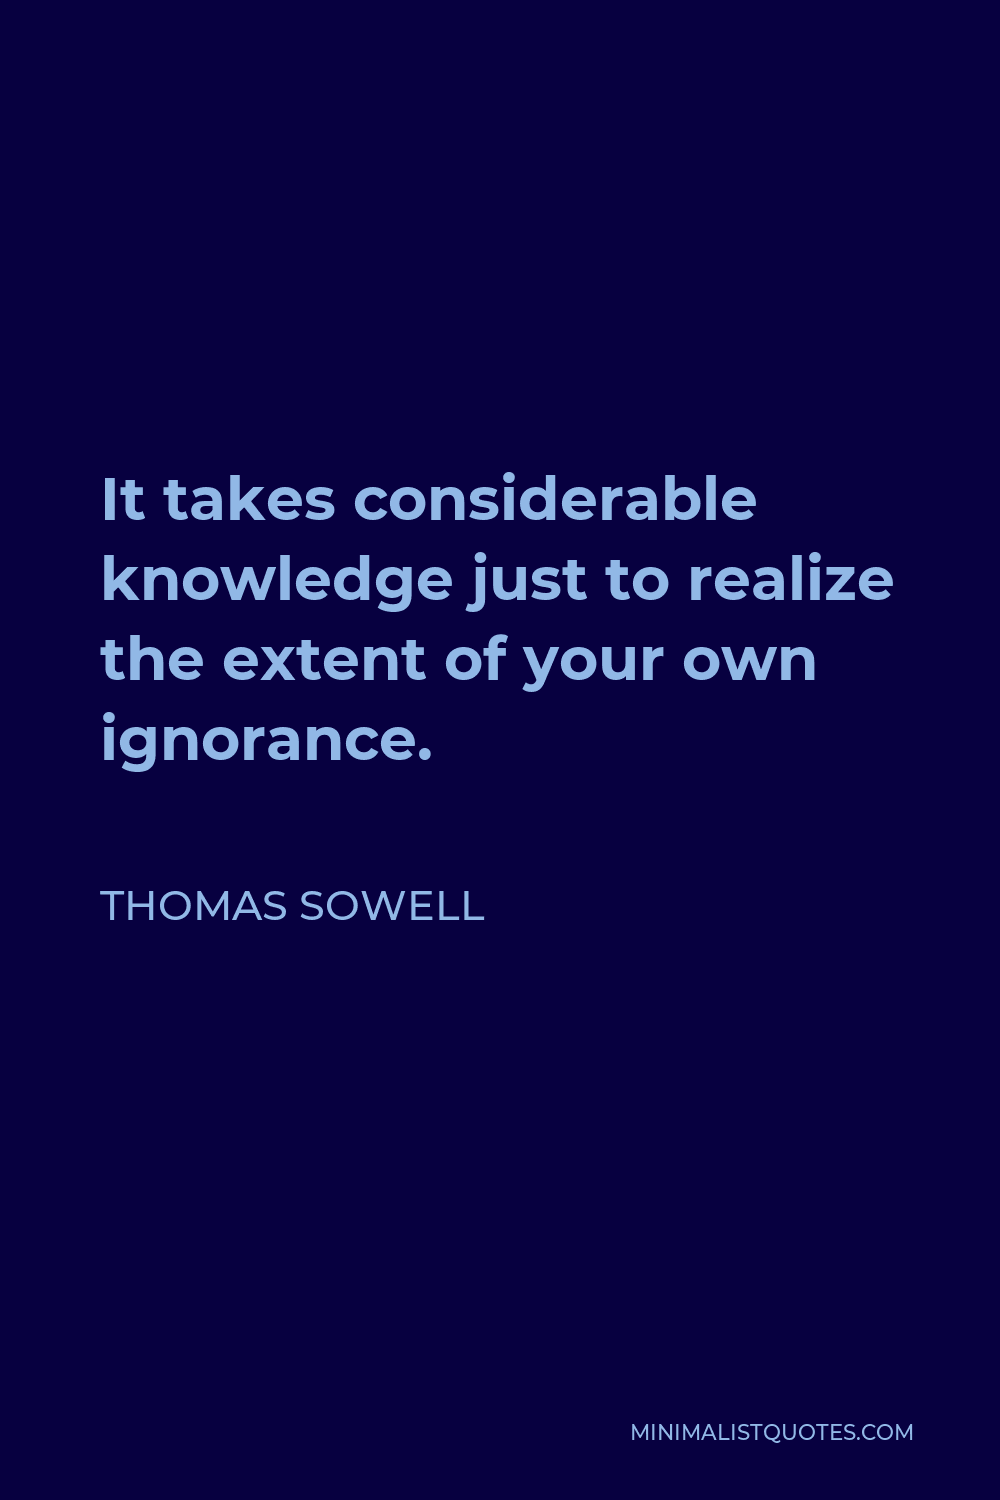 Thomas Sowell Quote - It takes considerable knowledge just to realize the extent of your own ignorance.